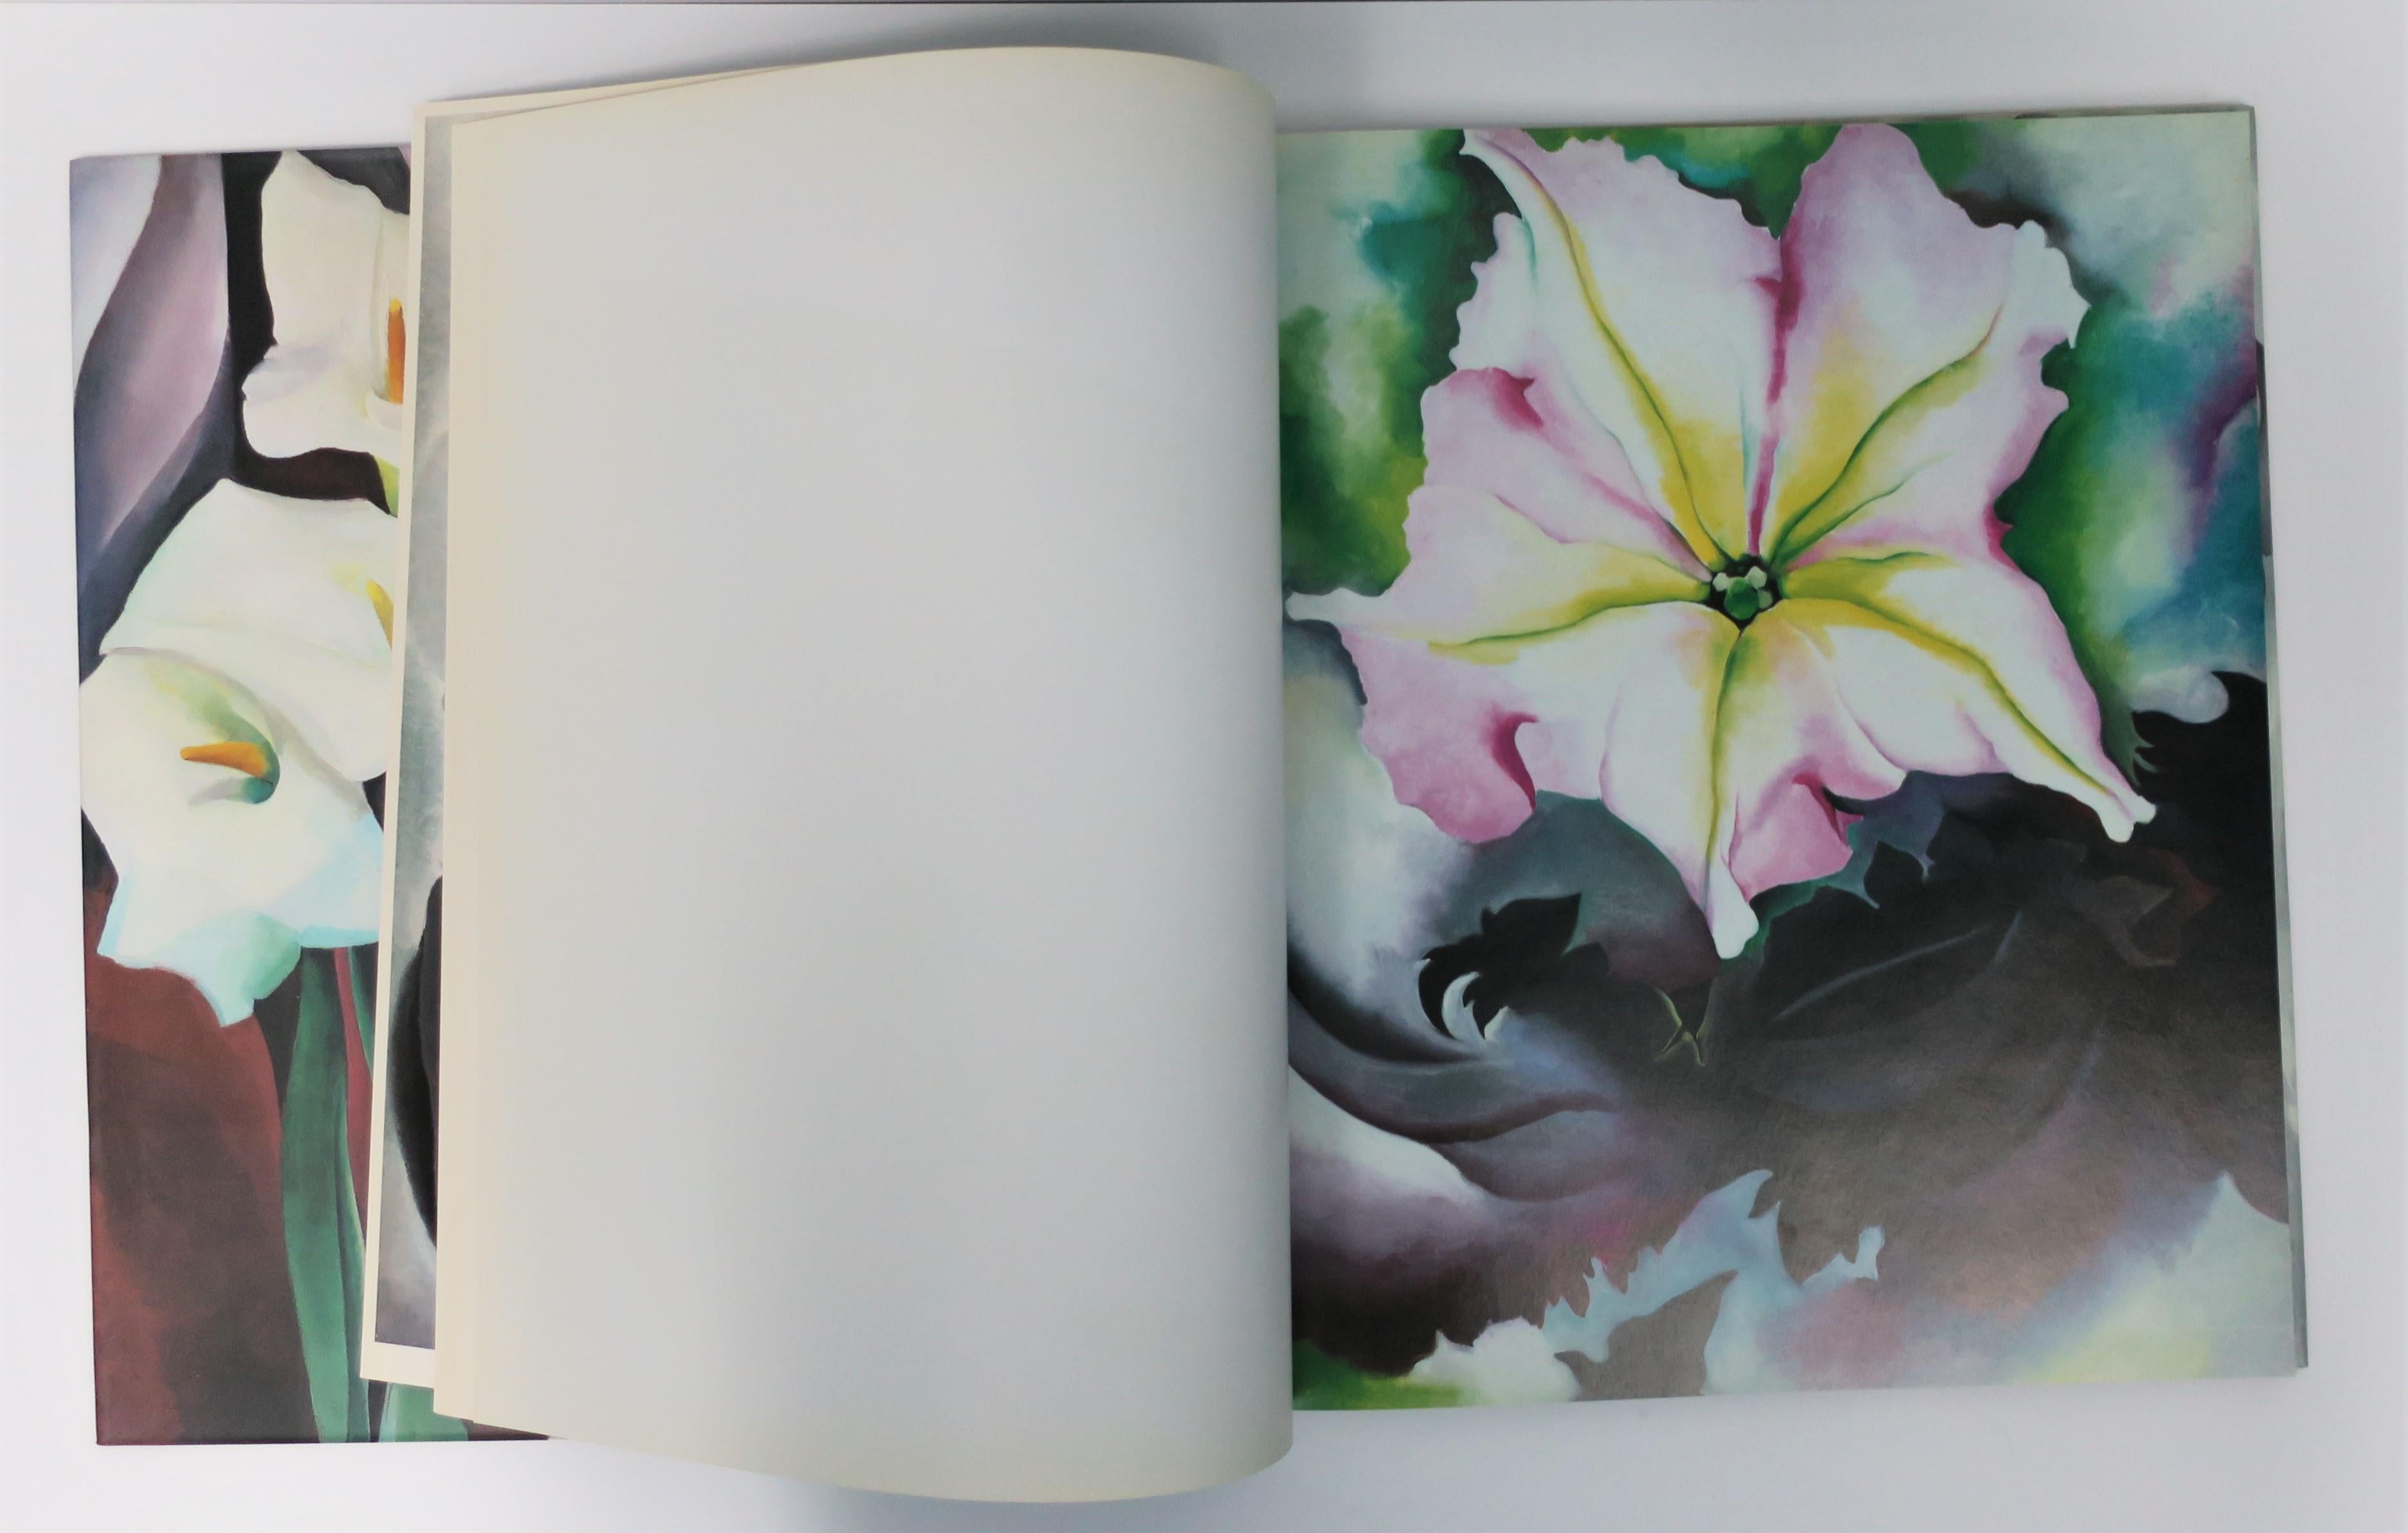 Georgia O'Keeffe, 'One Hundred Flowers', Coffee Table or Library Book, 1980s 1